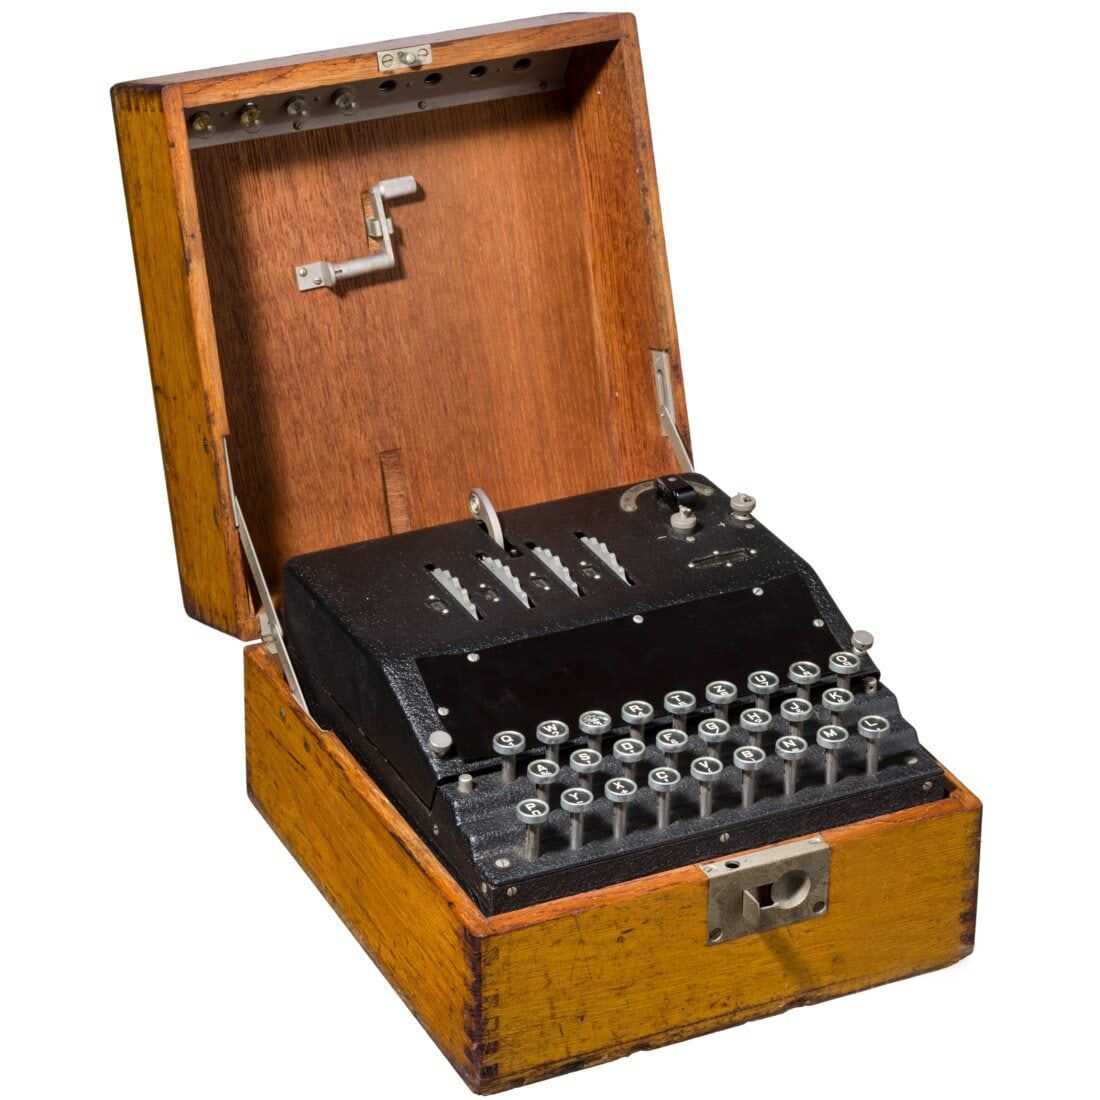 Enigma G cipher machine from the German Intelligence Service (Abwehr), one of just 20 known surviving examples, estimated at €90,000-€180,000 ($96,285-$192,575) at Hermann Historica on May 10.